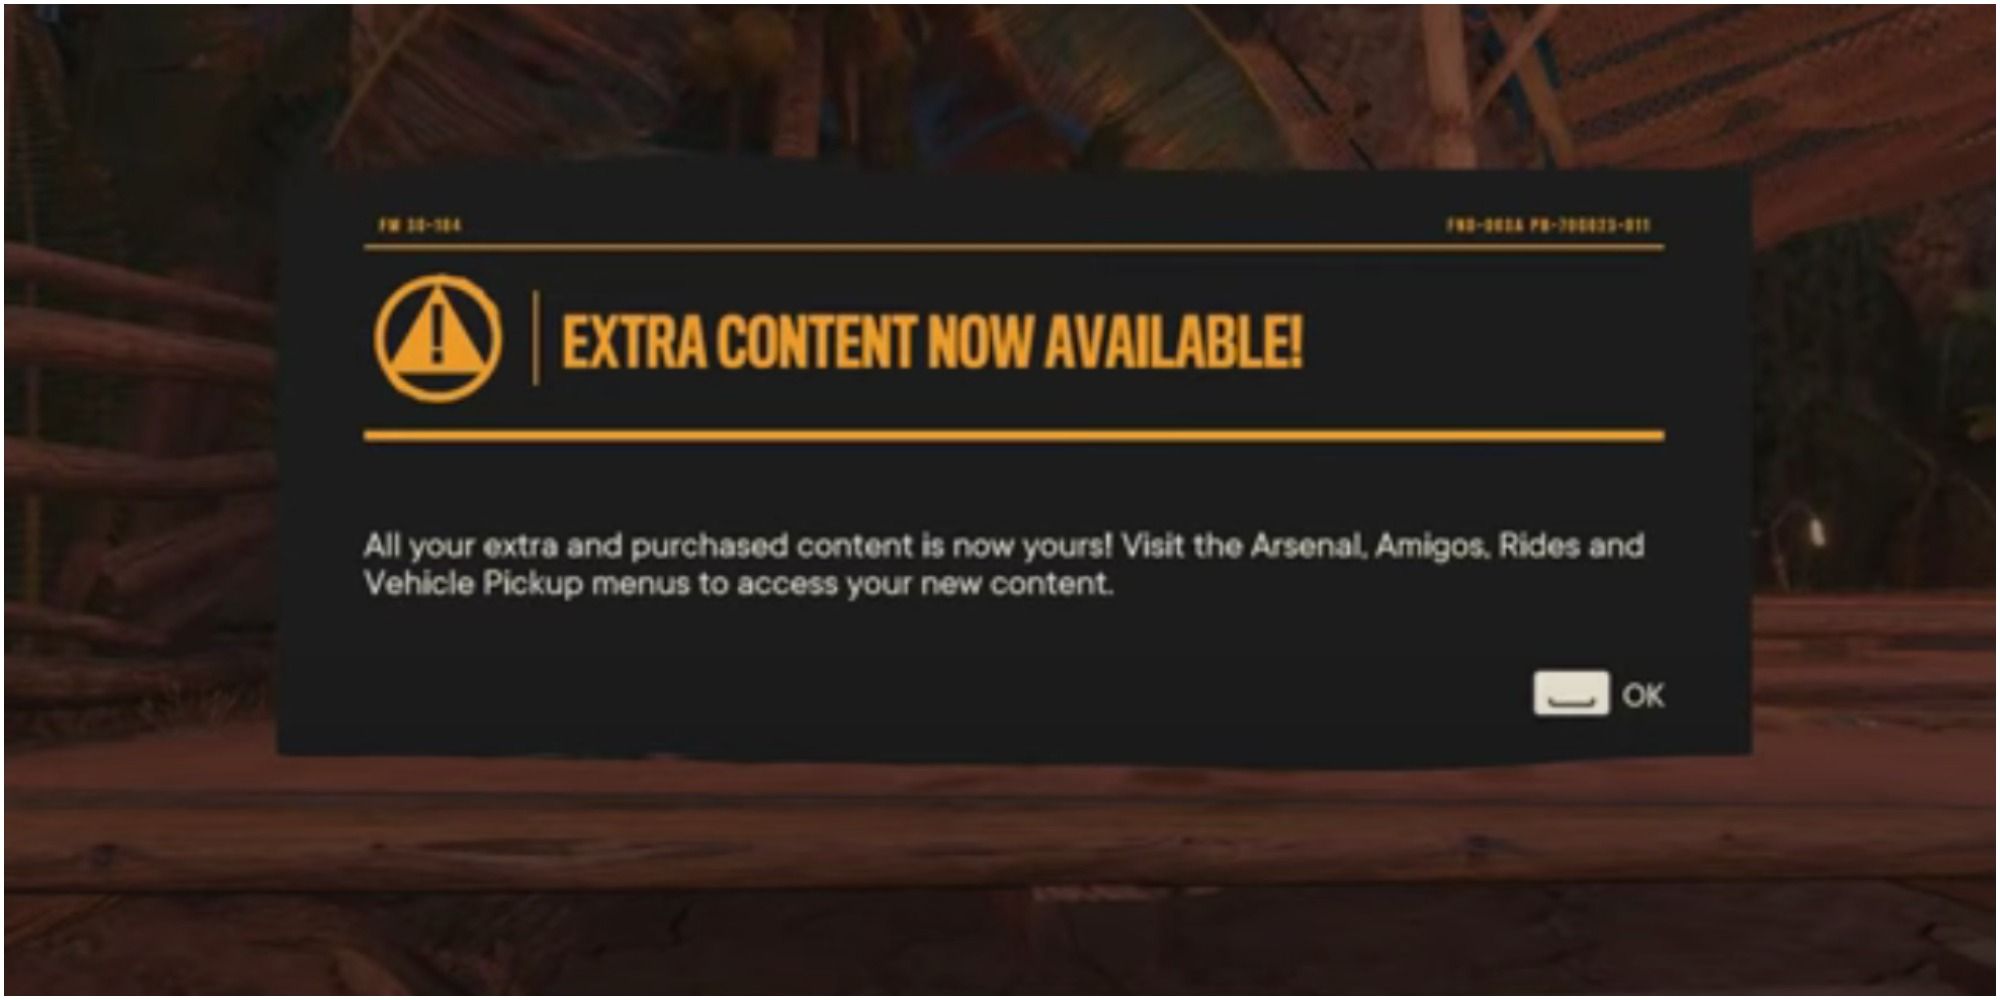 far cry 6 extra content now available notification 